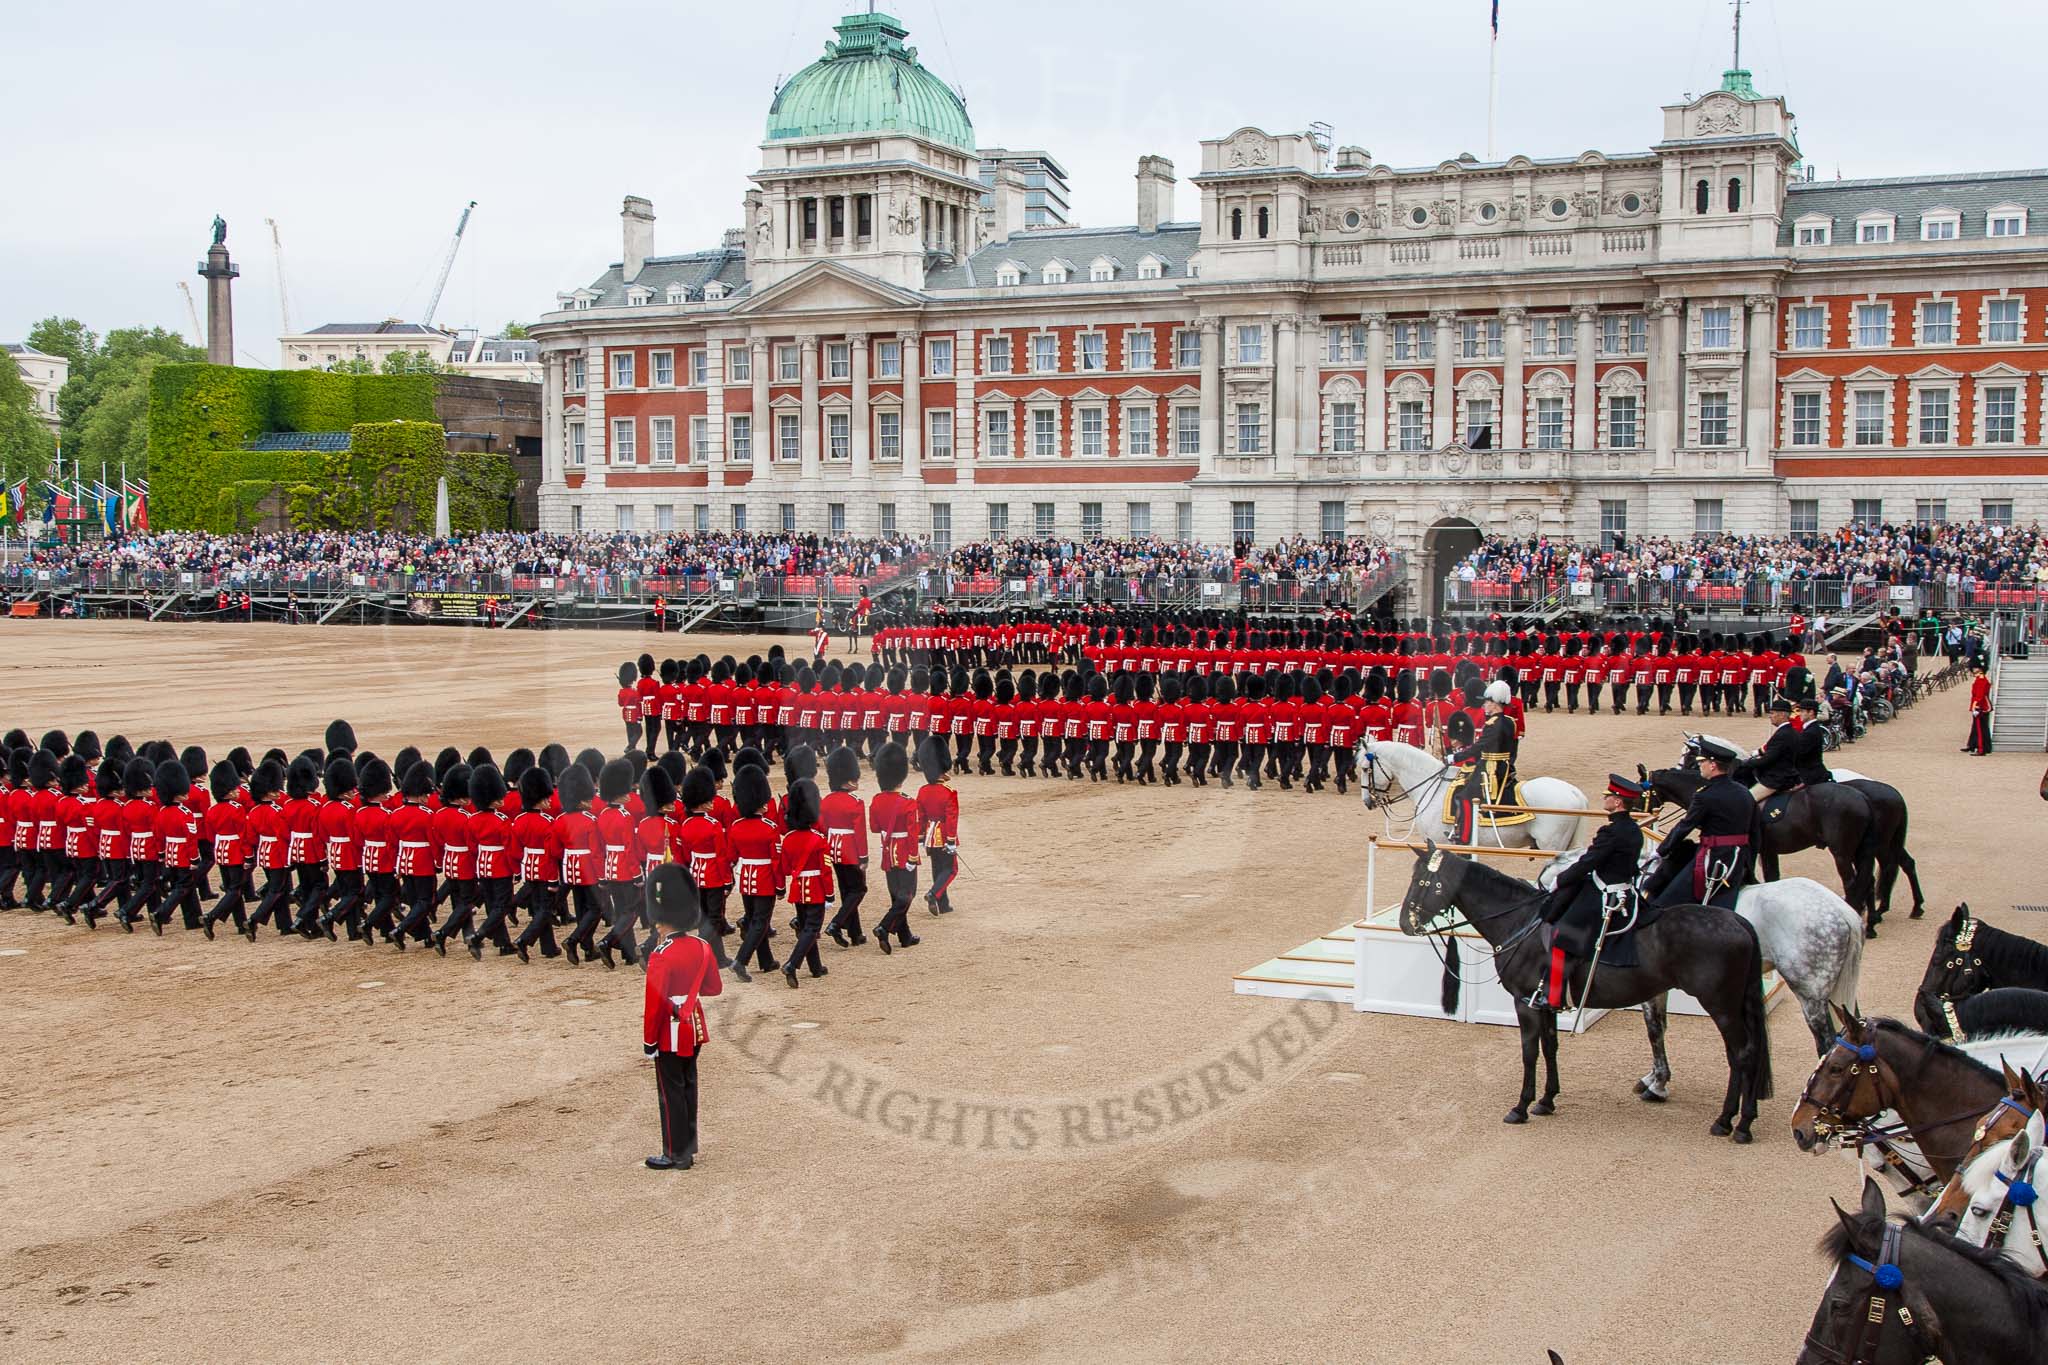 Major General's Review 2013: No. 1 to No. 5 Guard during the March Past..
Horse Guards Parade, Westminster,
London SW1,

United Kingdom,
on 01 June 2013 at 11:36, image #510